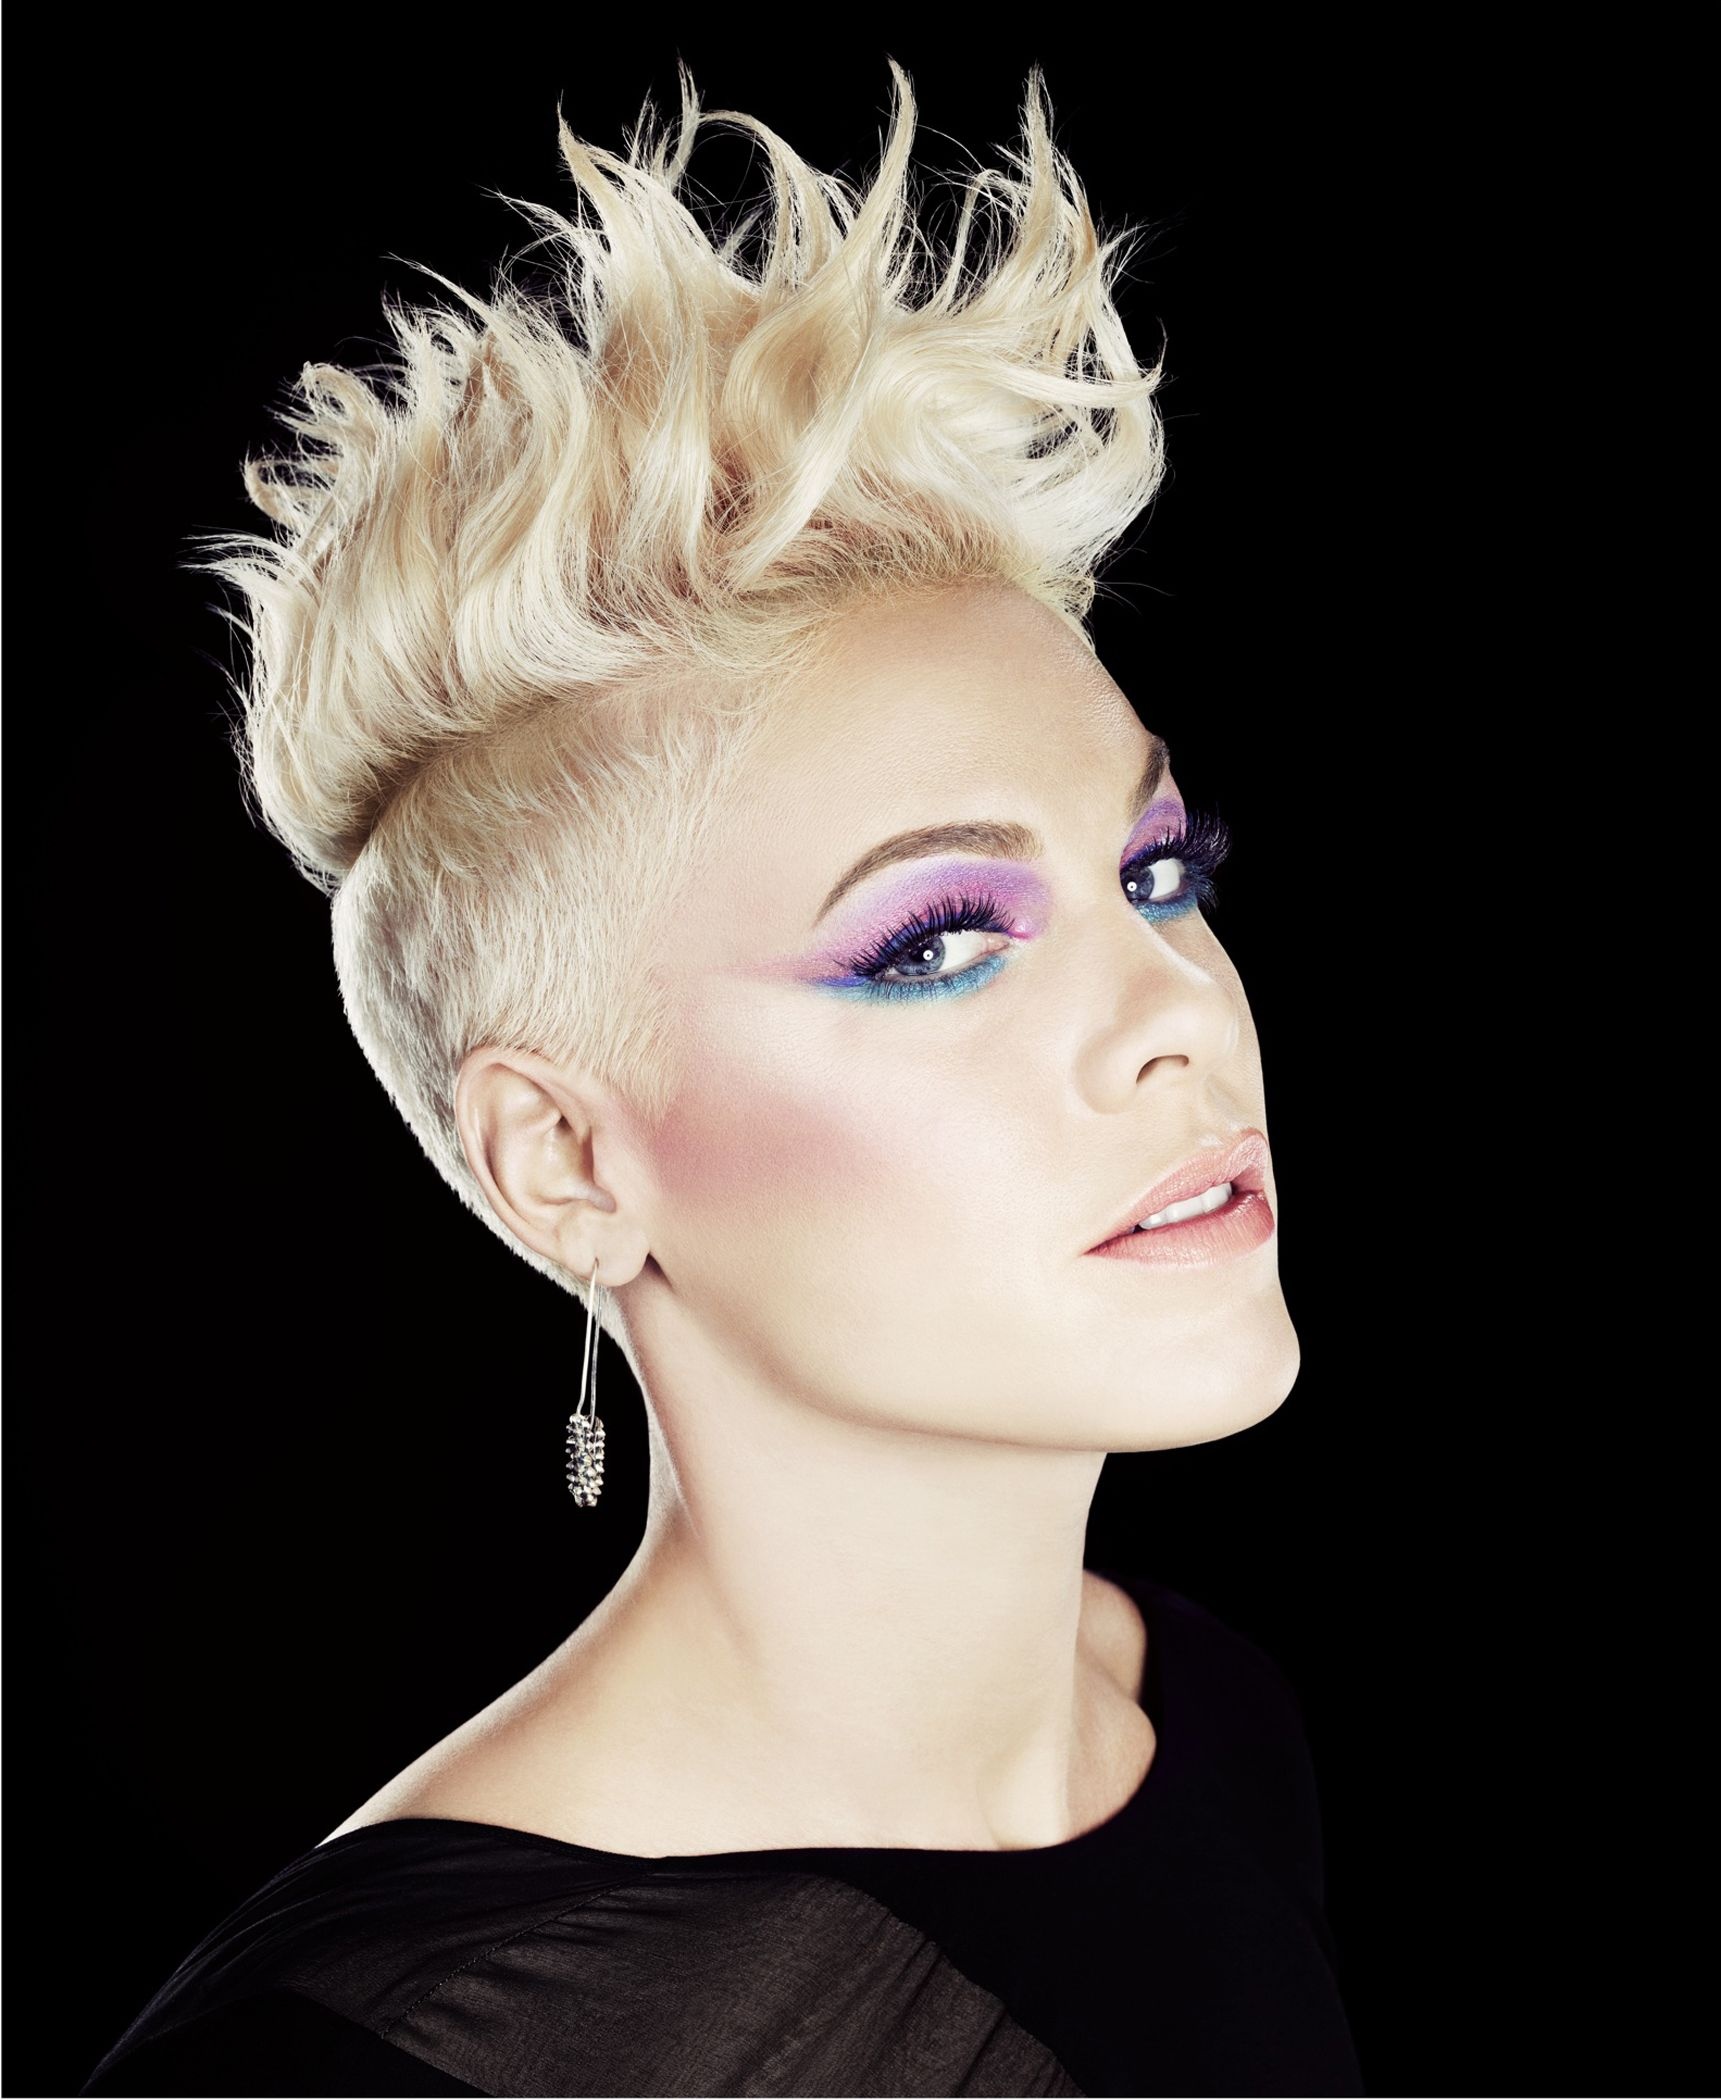 Pink American Singer Awesome Images And HD Wallpaper 1730x2100